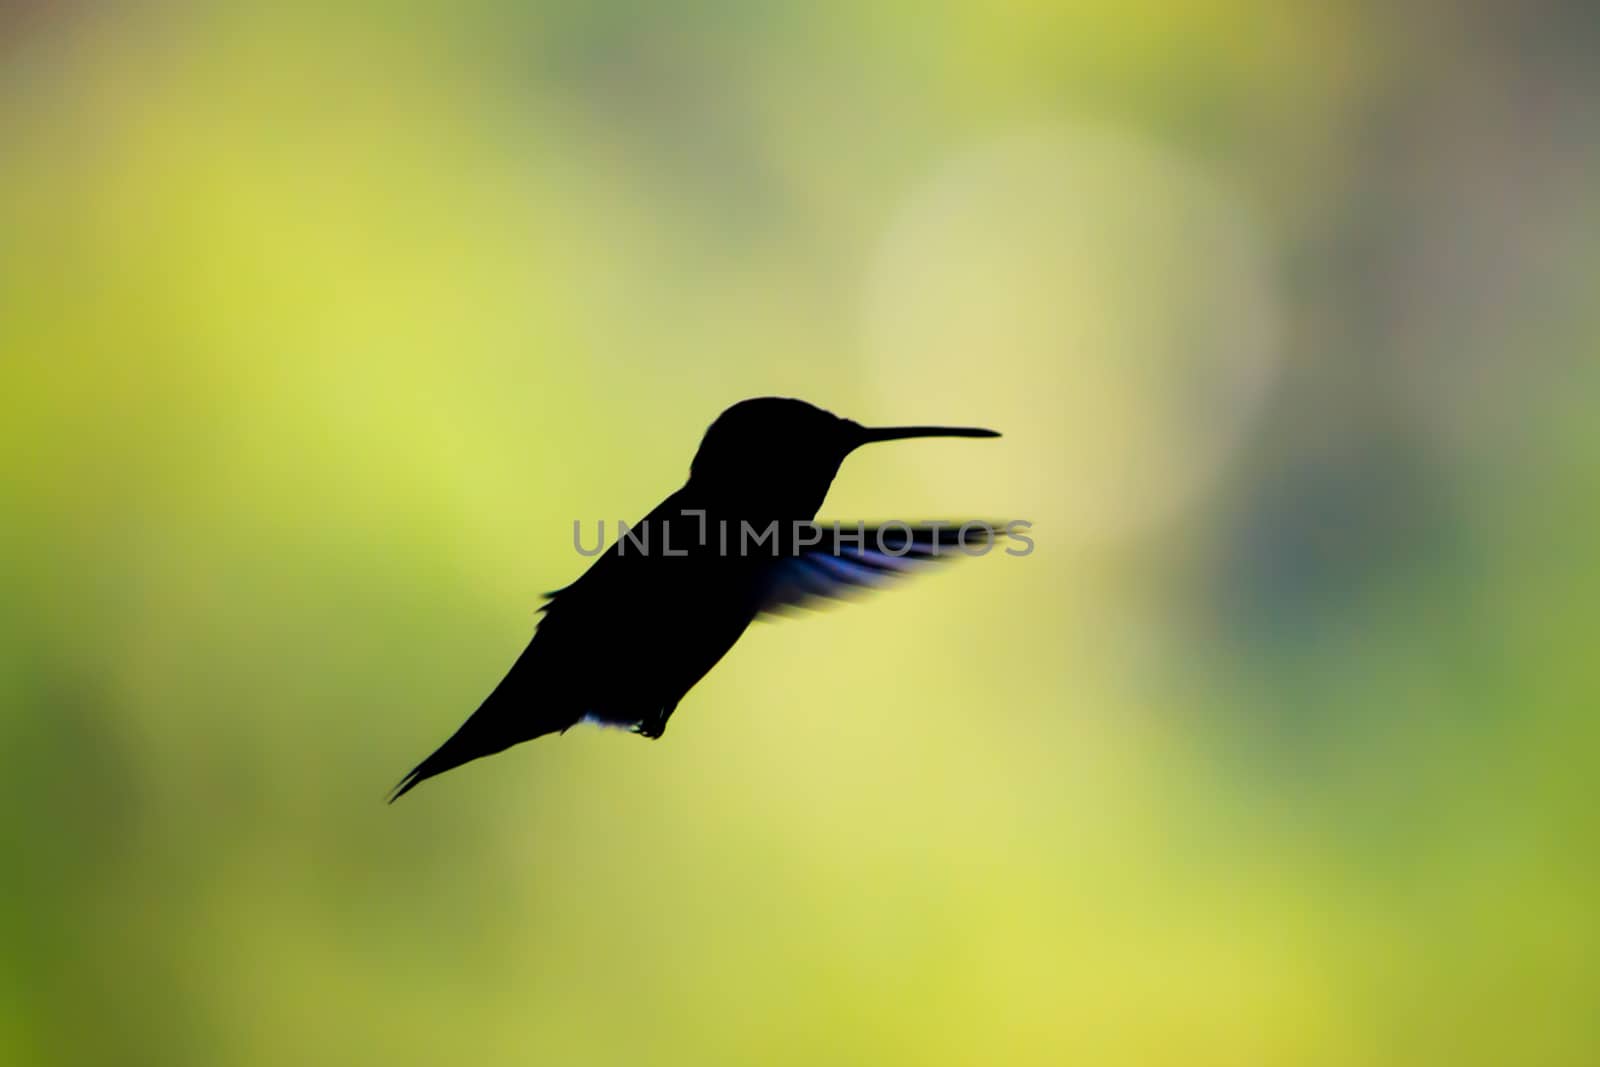 Hummingbird in flight and silhouette on a green background. copy space provided.